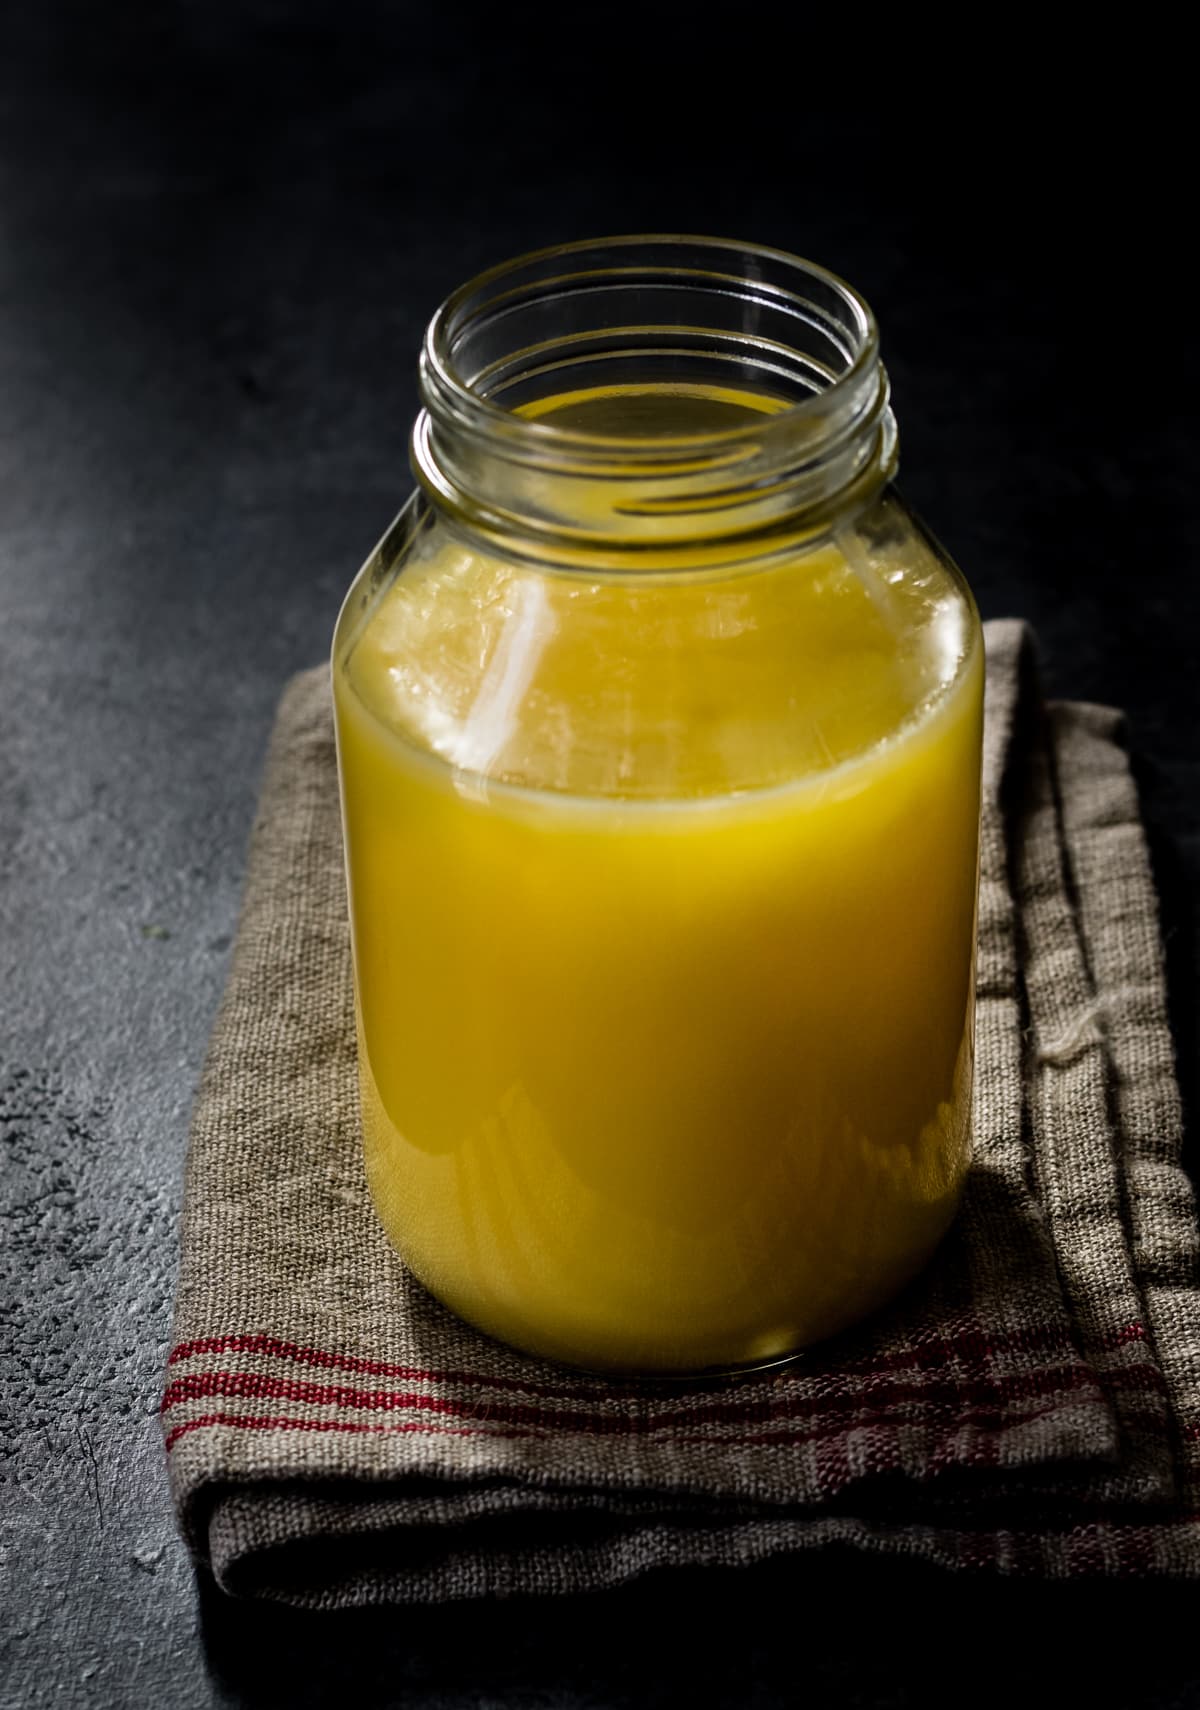 Ghee solidified after cooling down